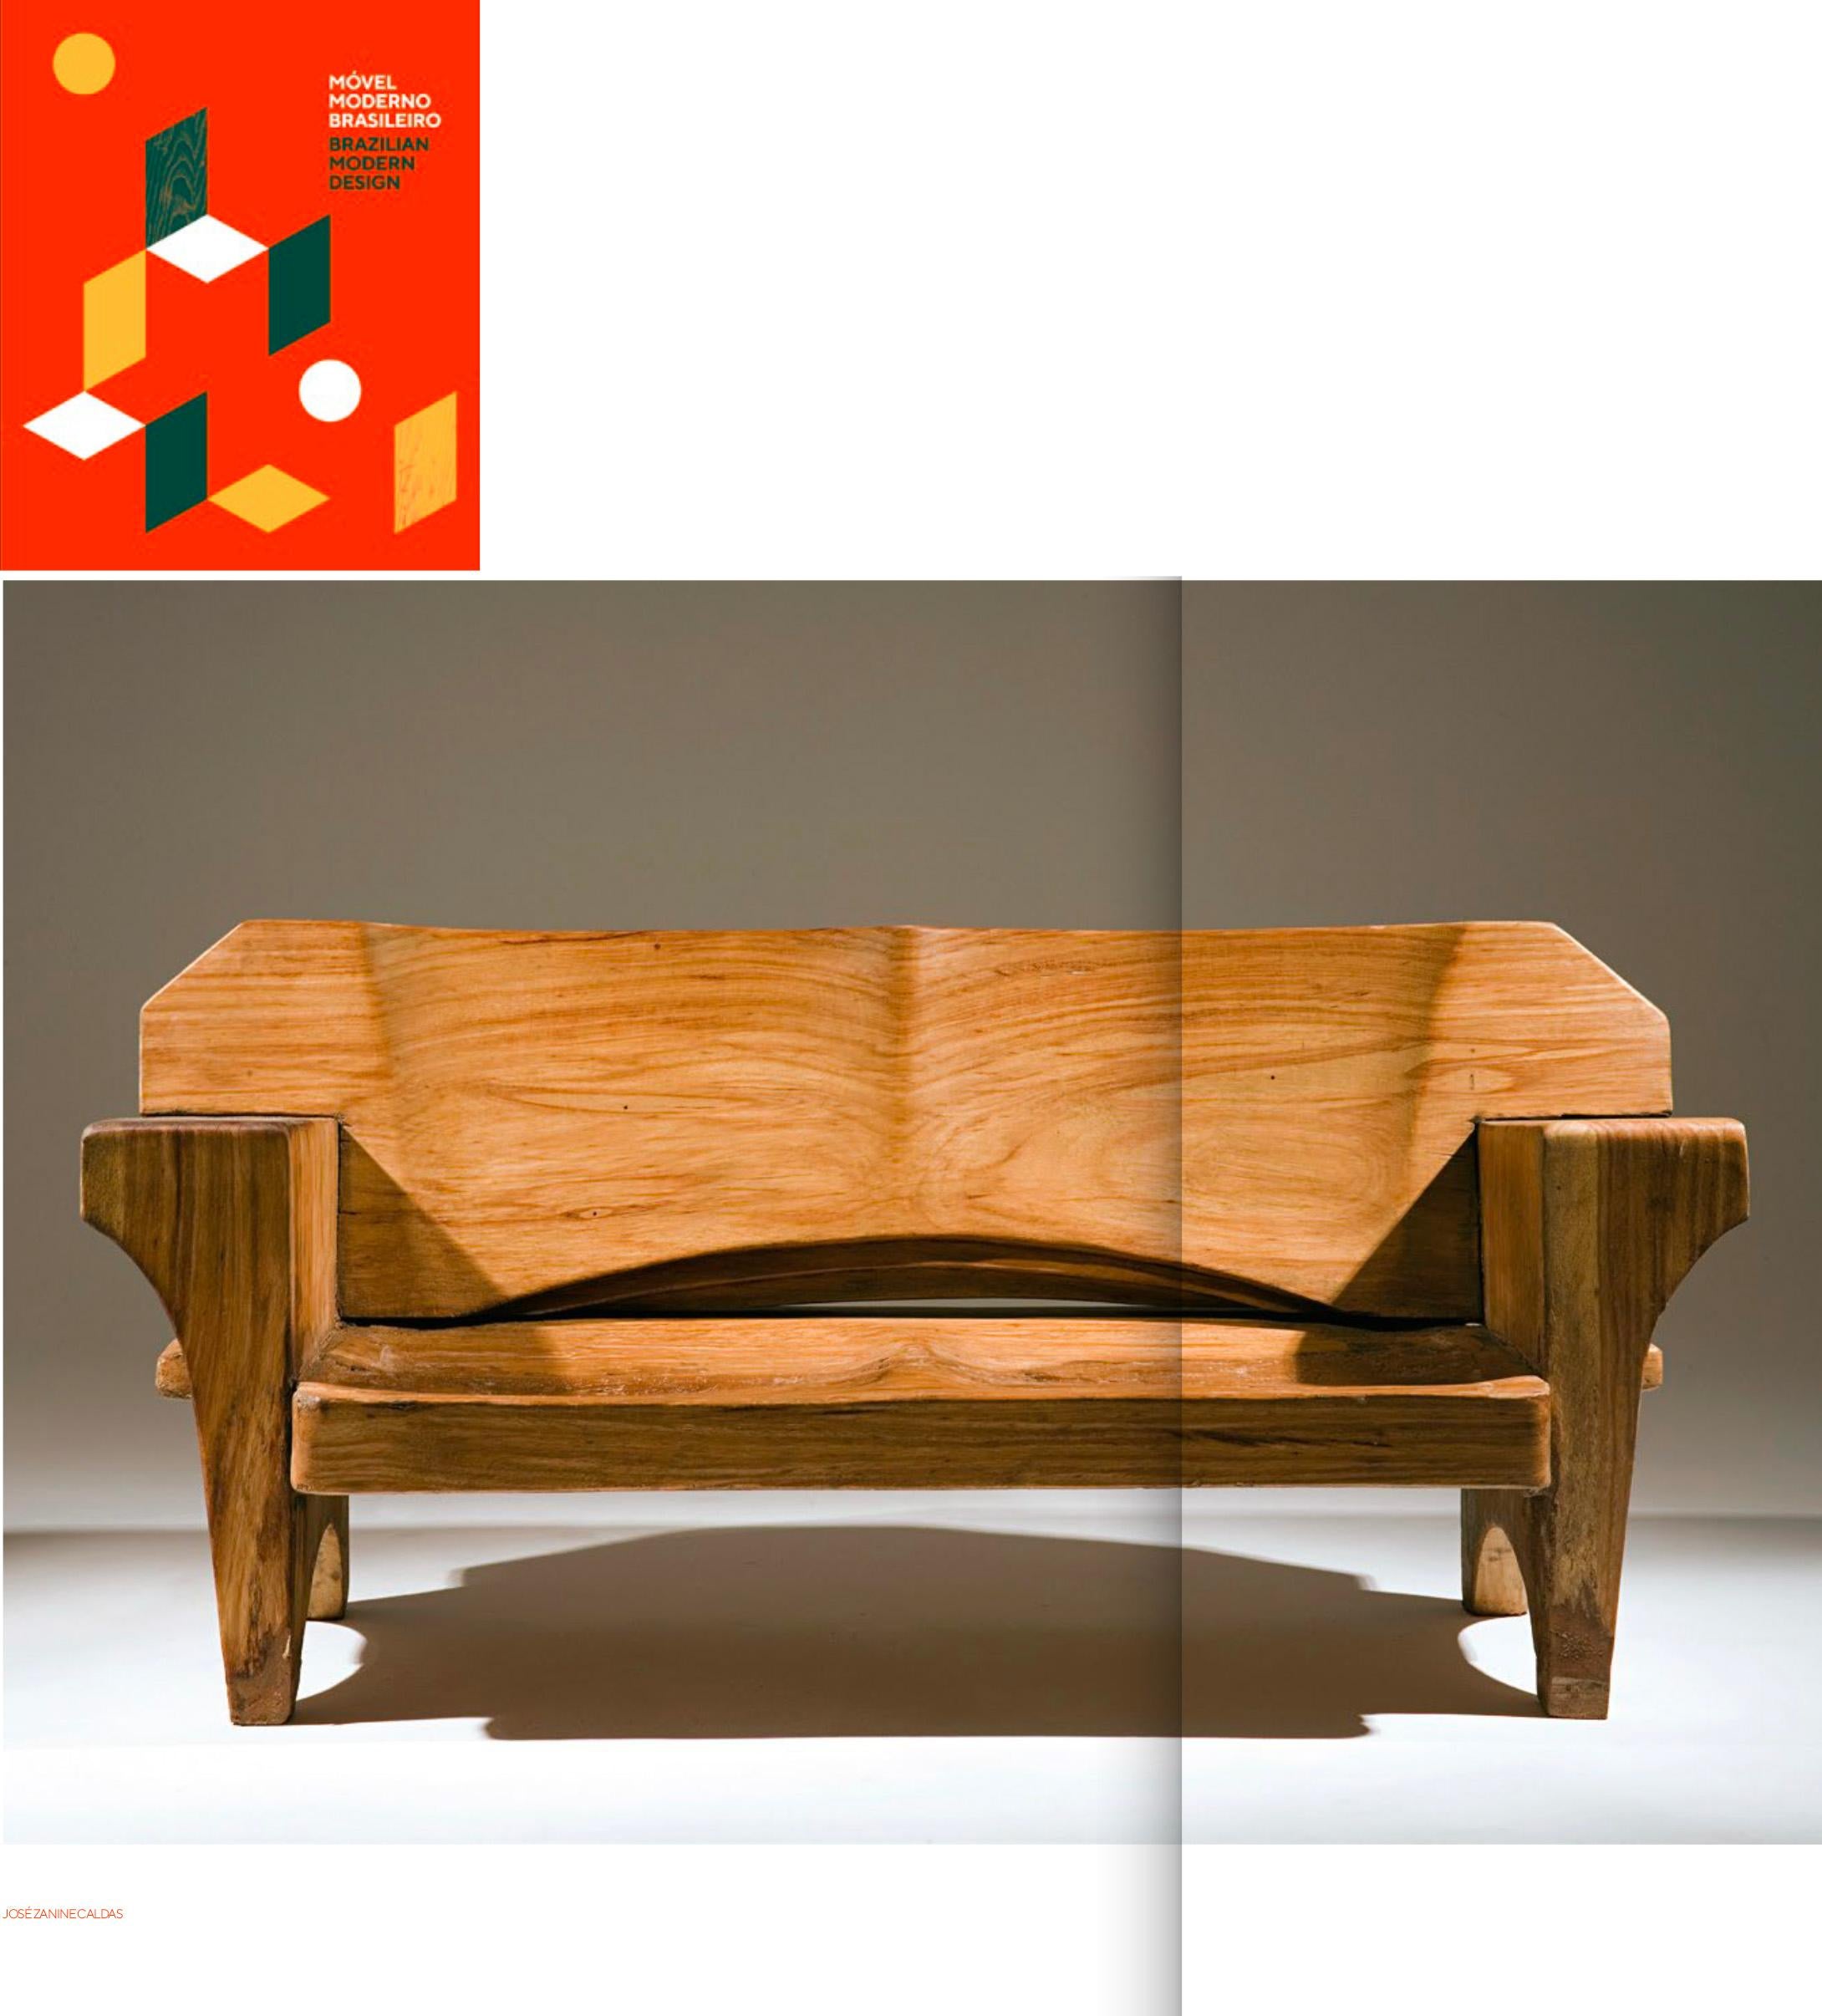 Sculptural Solid Wood and Handcrafted Sofa by Jose Zanine Caldas, circa 1980 For Sale 4